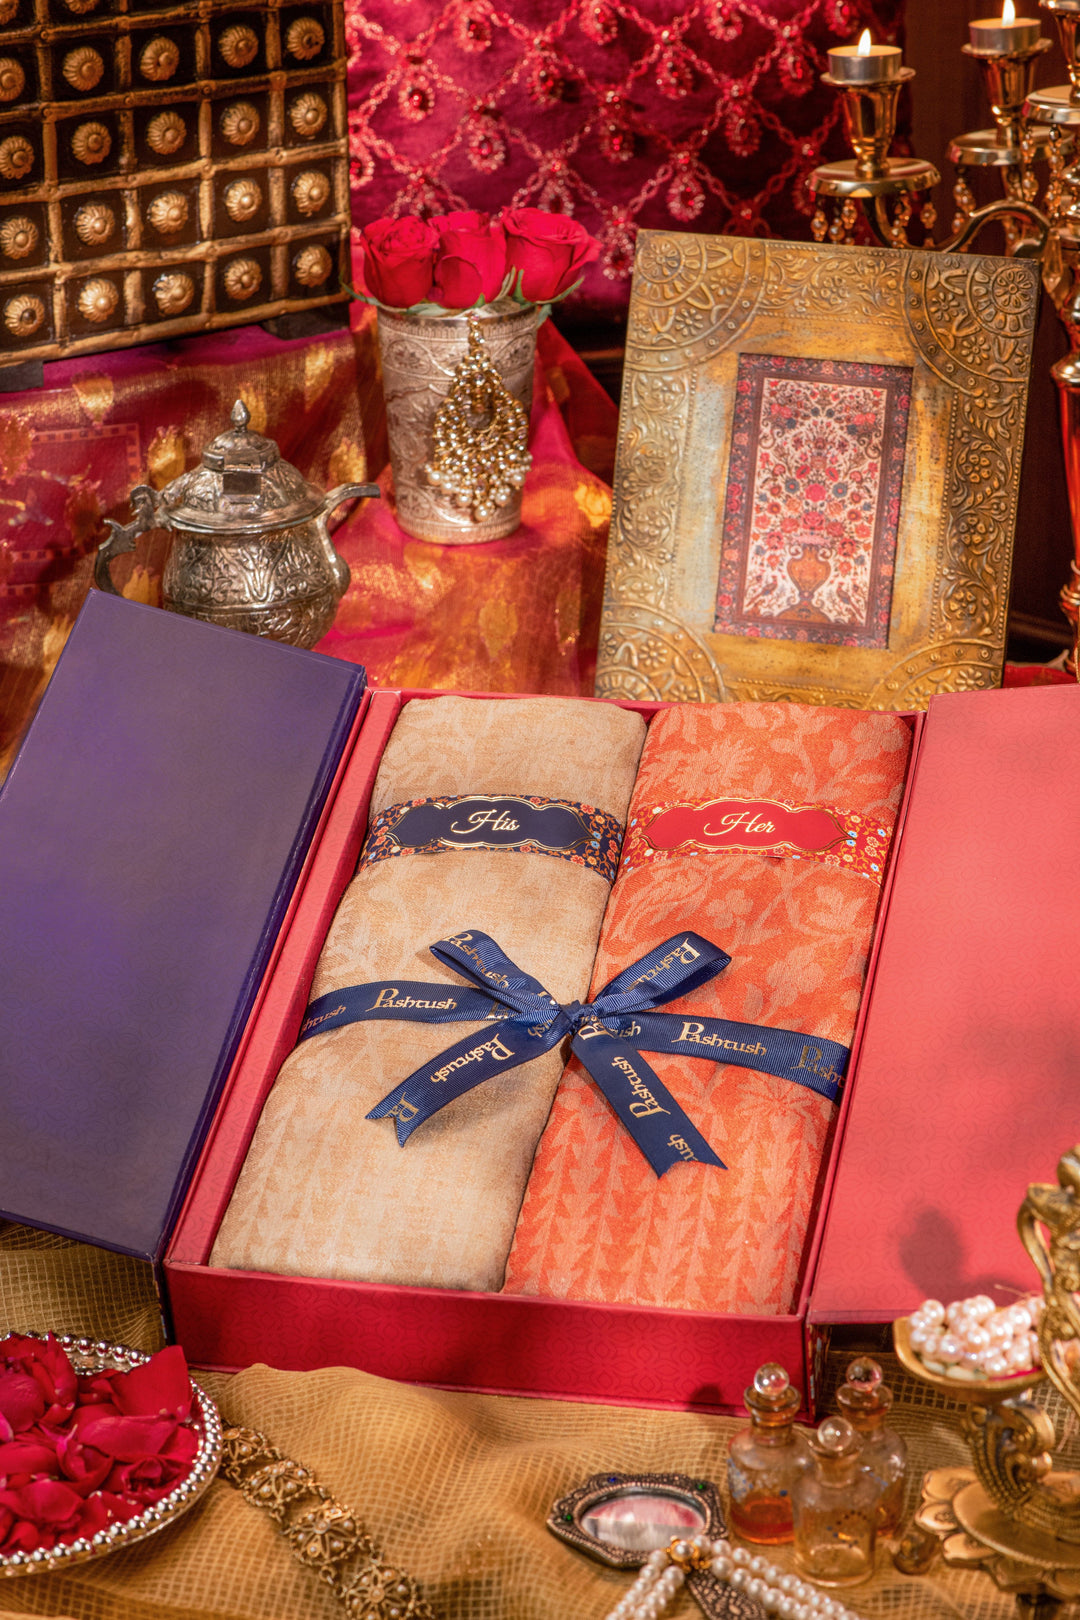 Pashtush India Gift Pack Pashtush His And Her Gift Set Of Floral Design Fine Wool Stoles With Premium Gift Box Packaging, Taupe and Deep Orange